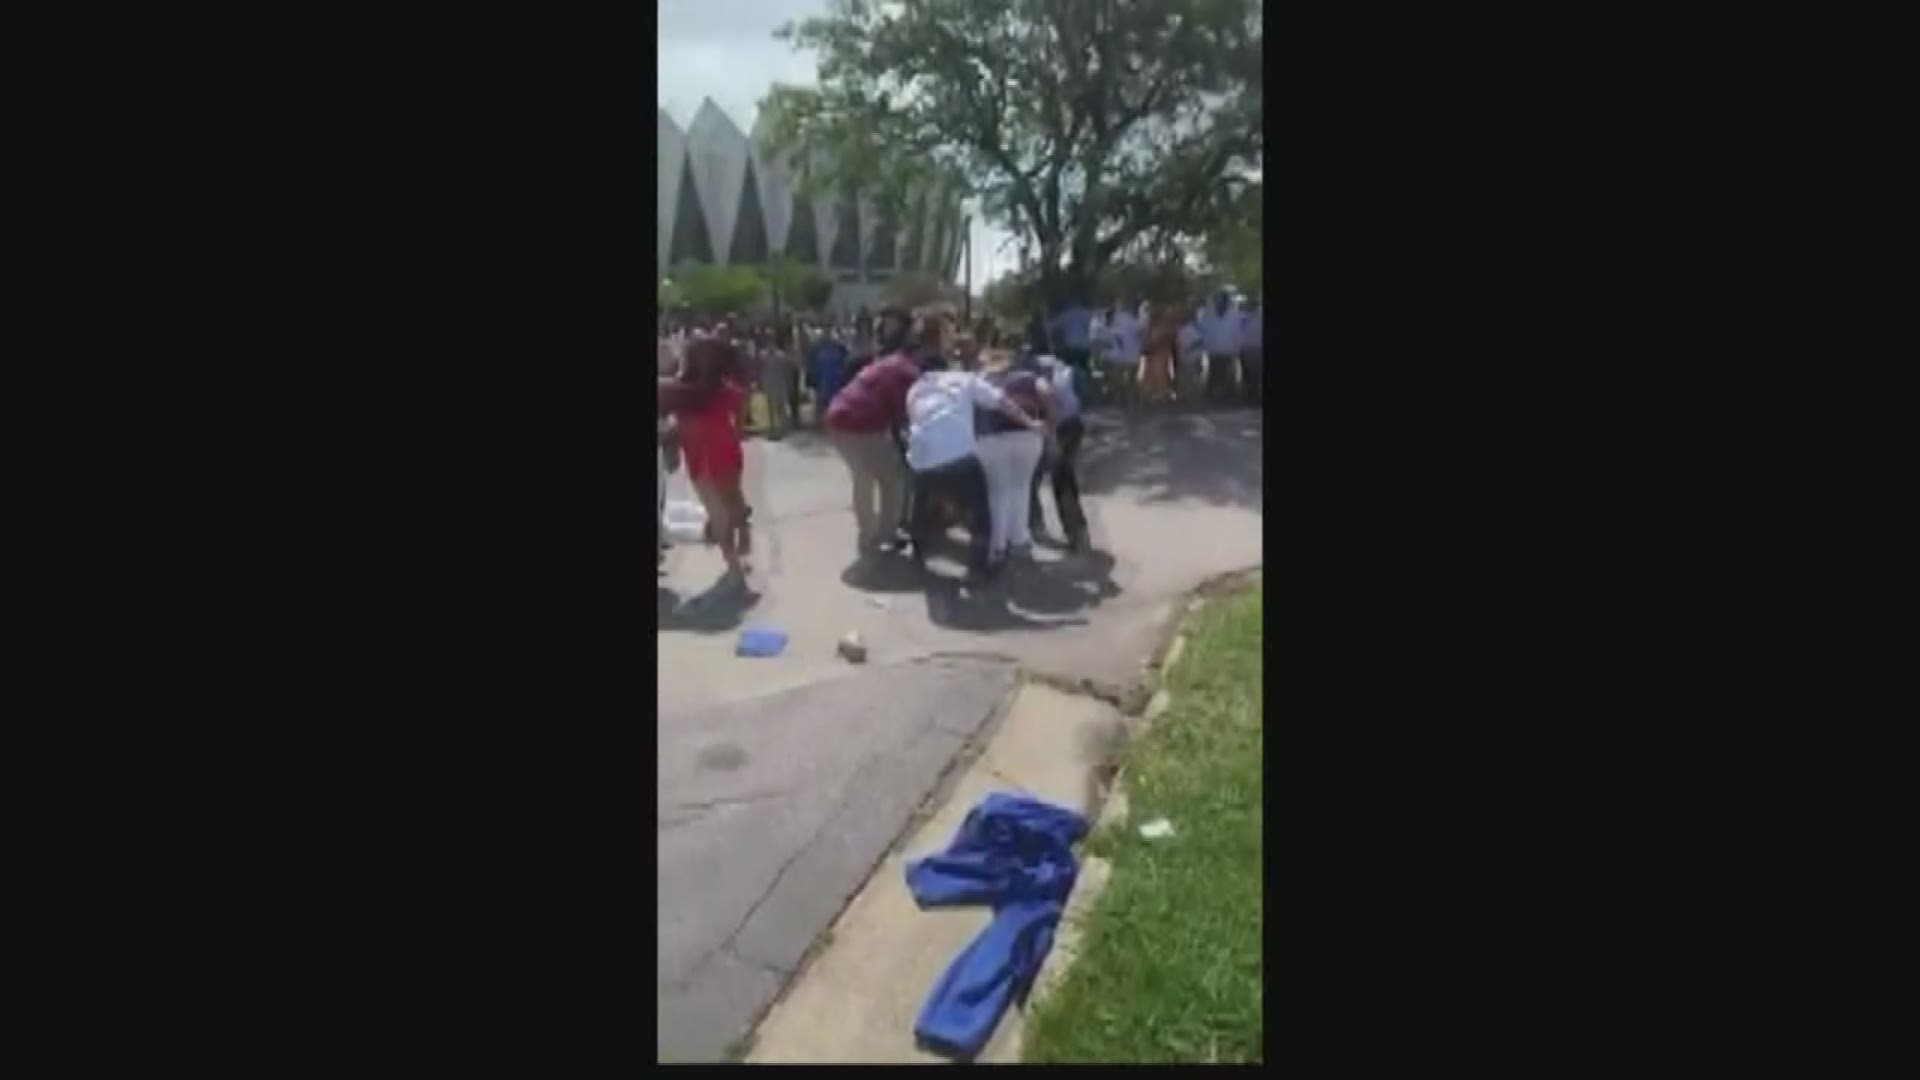 One witness tells 13News Now this was the graduation for Phoebus High School. She says after the ceremony, several fights broke out in the parking lot. She also tells us adults were egging the fighters on, ruining a special day for so many families.